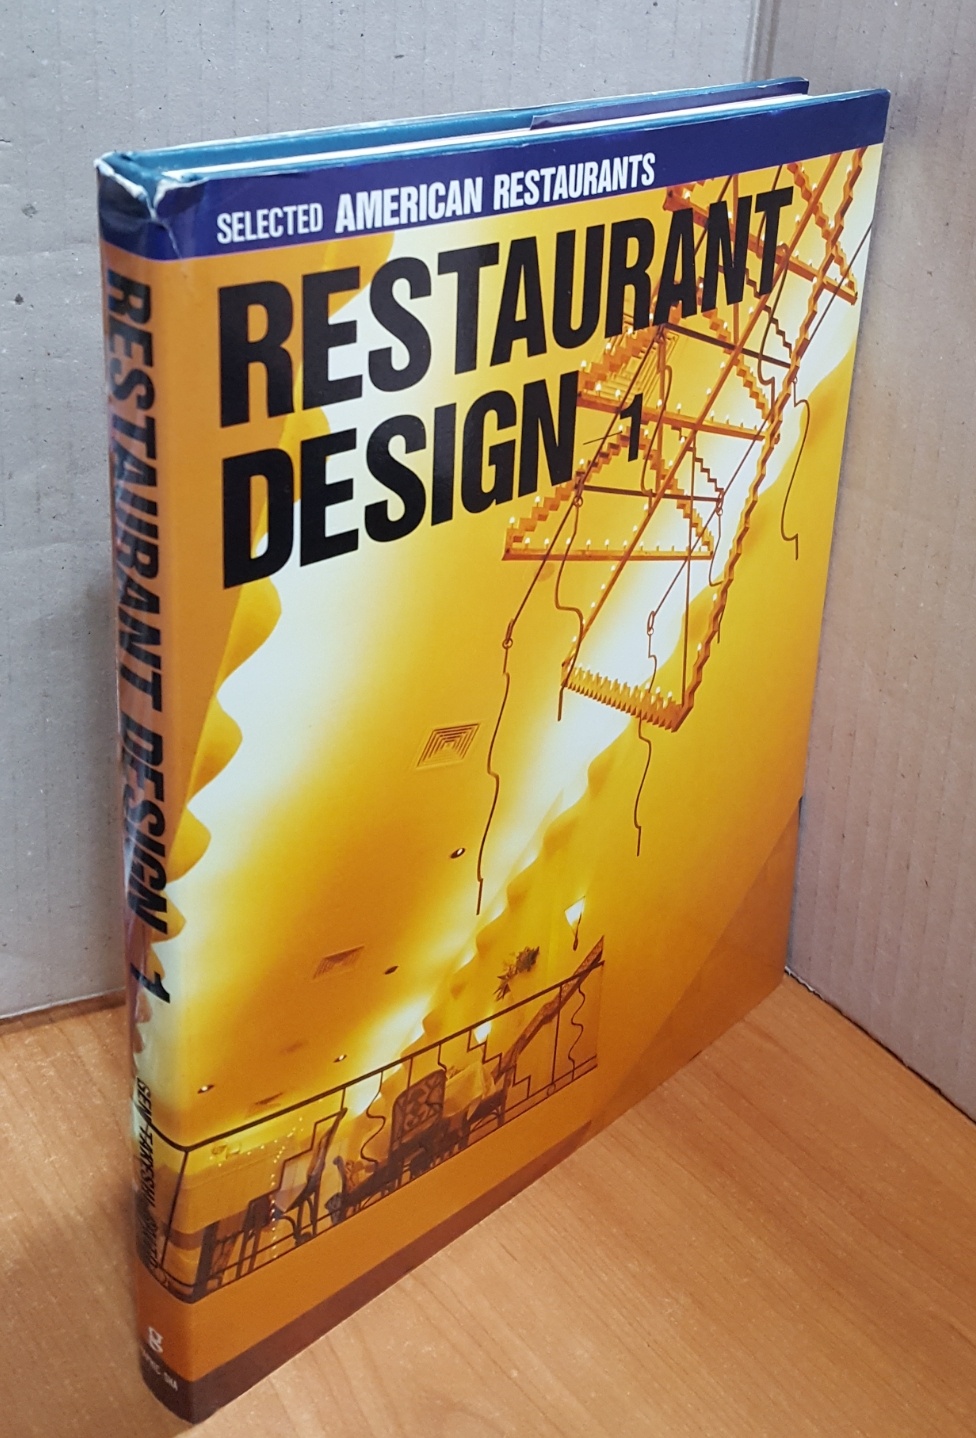 Restaurant Design-1: Selected American Restaurants (English and Japanese Edition) 